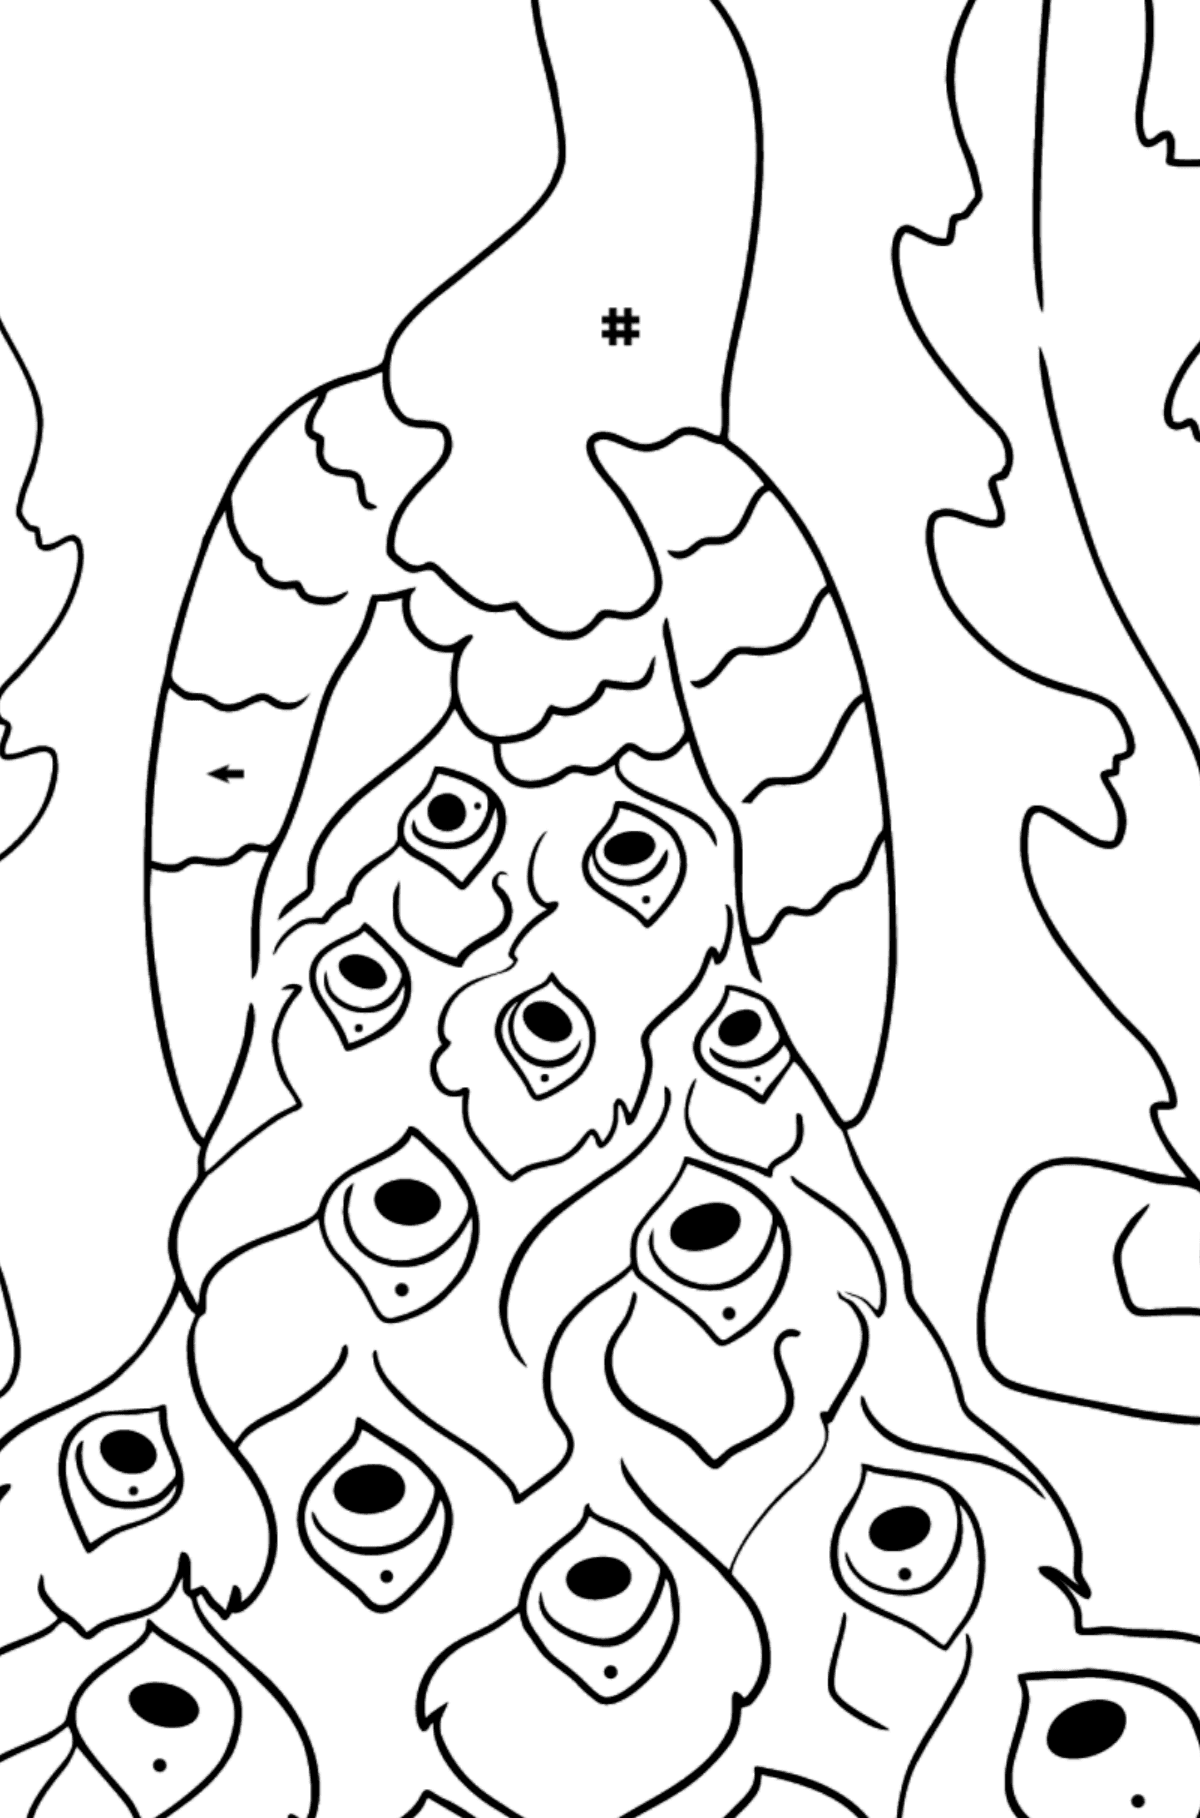 A Pompous and Haughty Peacock Coloring Page - Coloring by Symbols for Kids